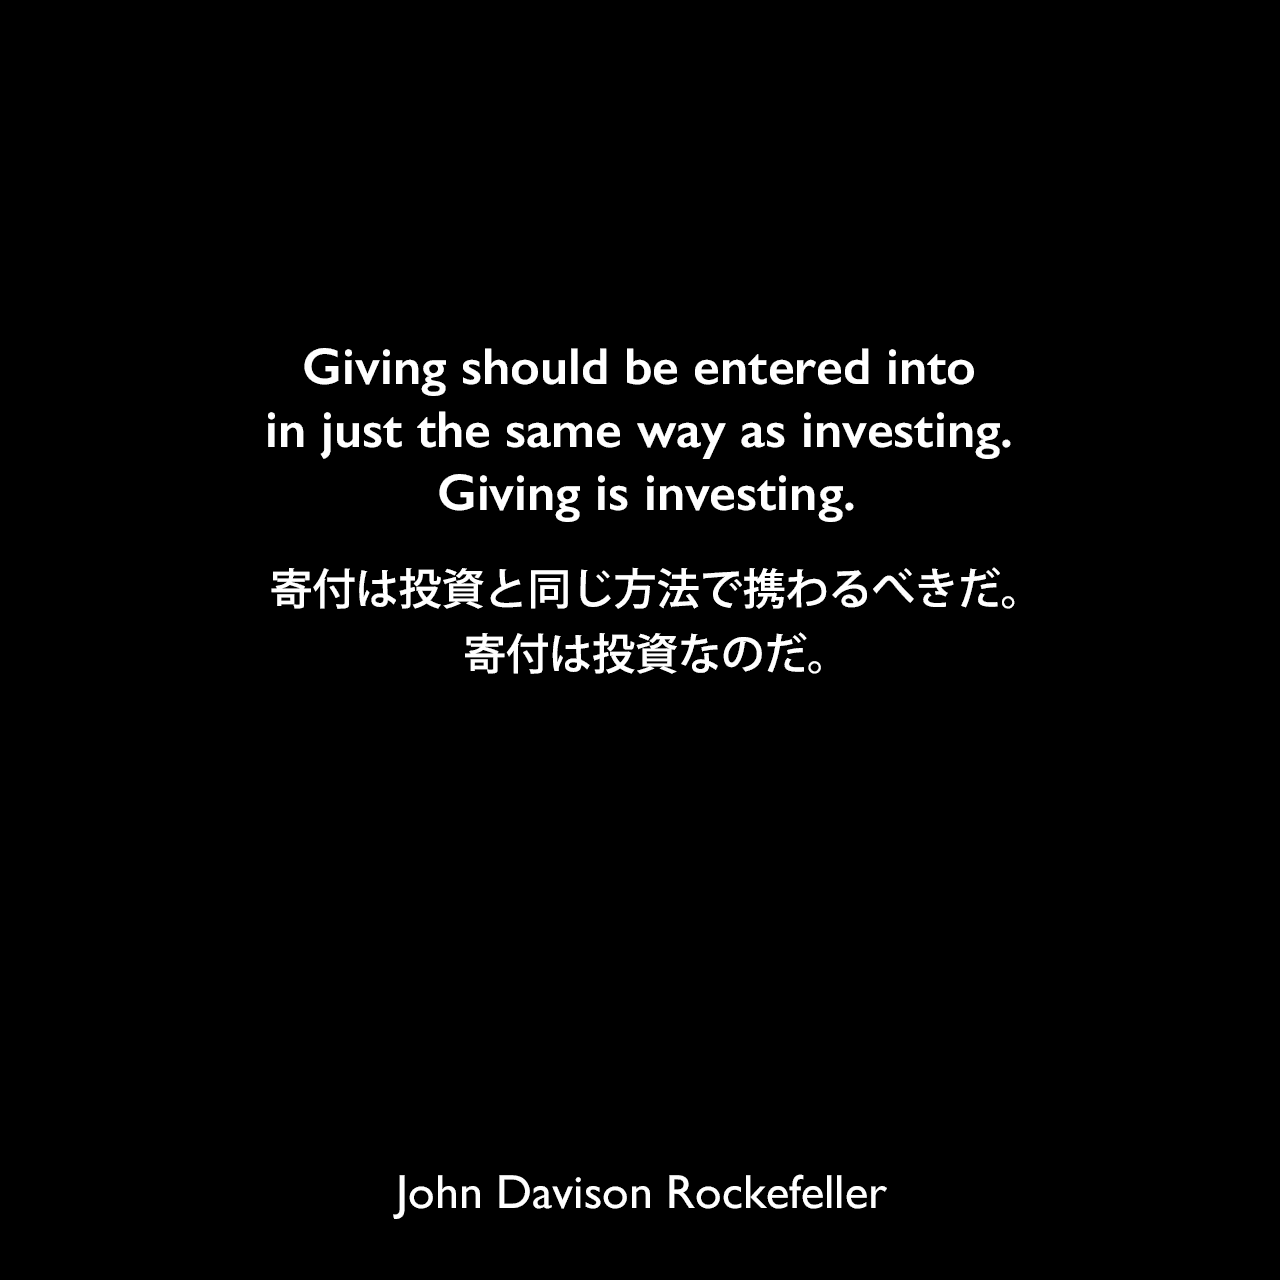 Giving should be entered into in just the same way as investing. Giving is investing.寄付は投資と同じ方法で携わるべきだ。寄付は投資なのだ。John Davison Rockefeller